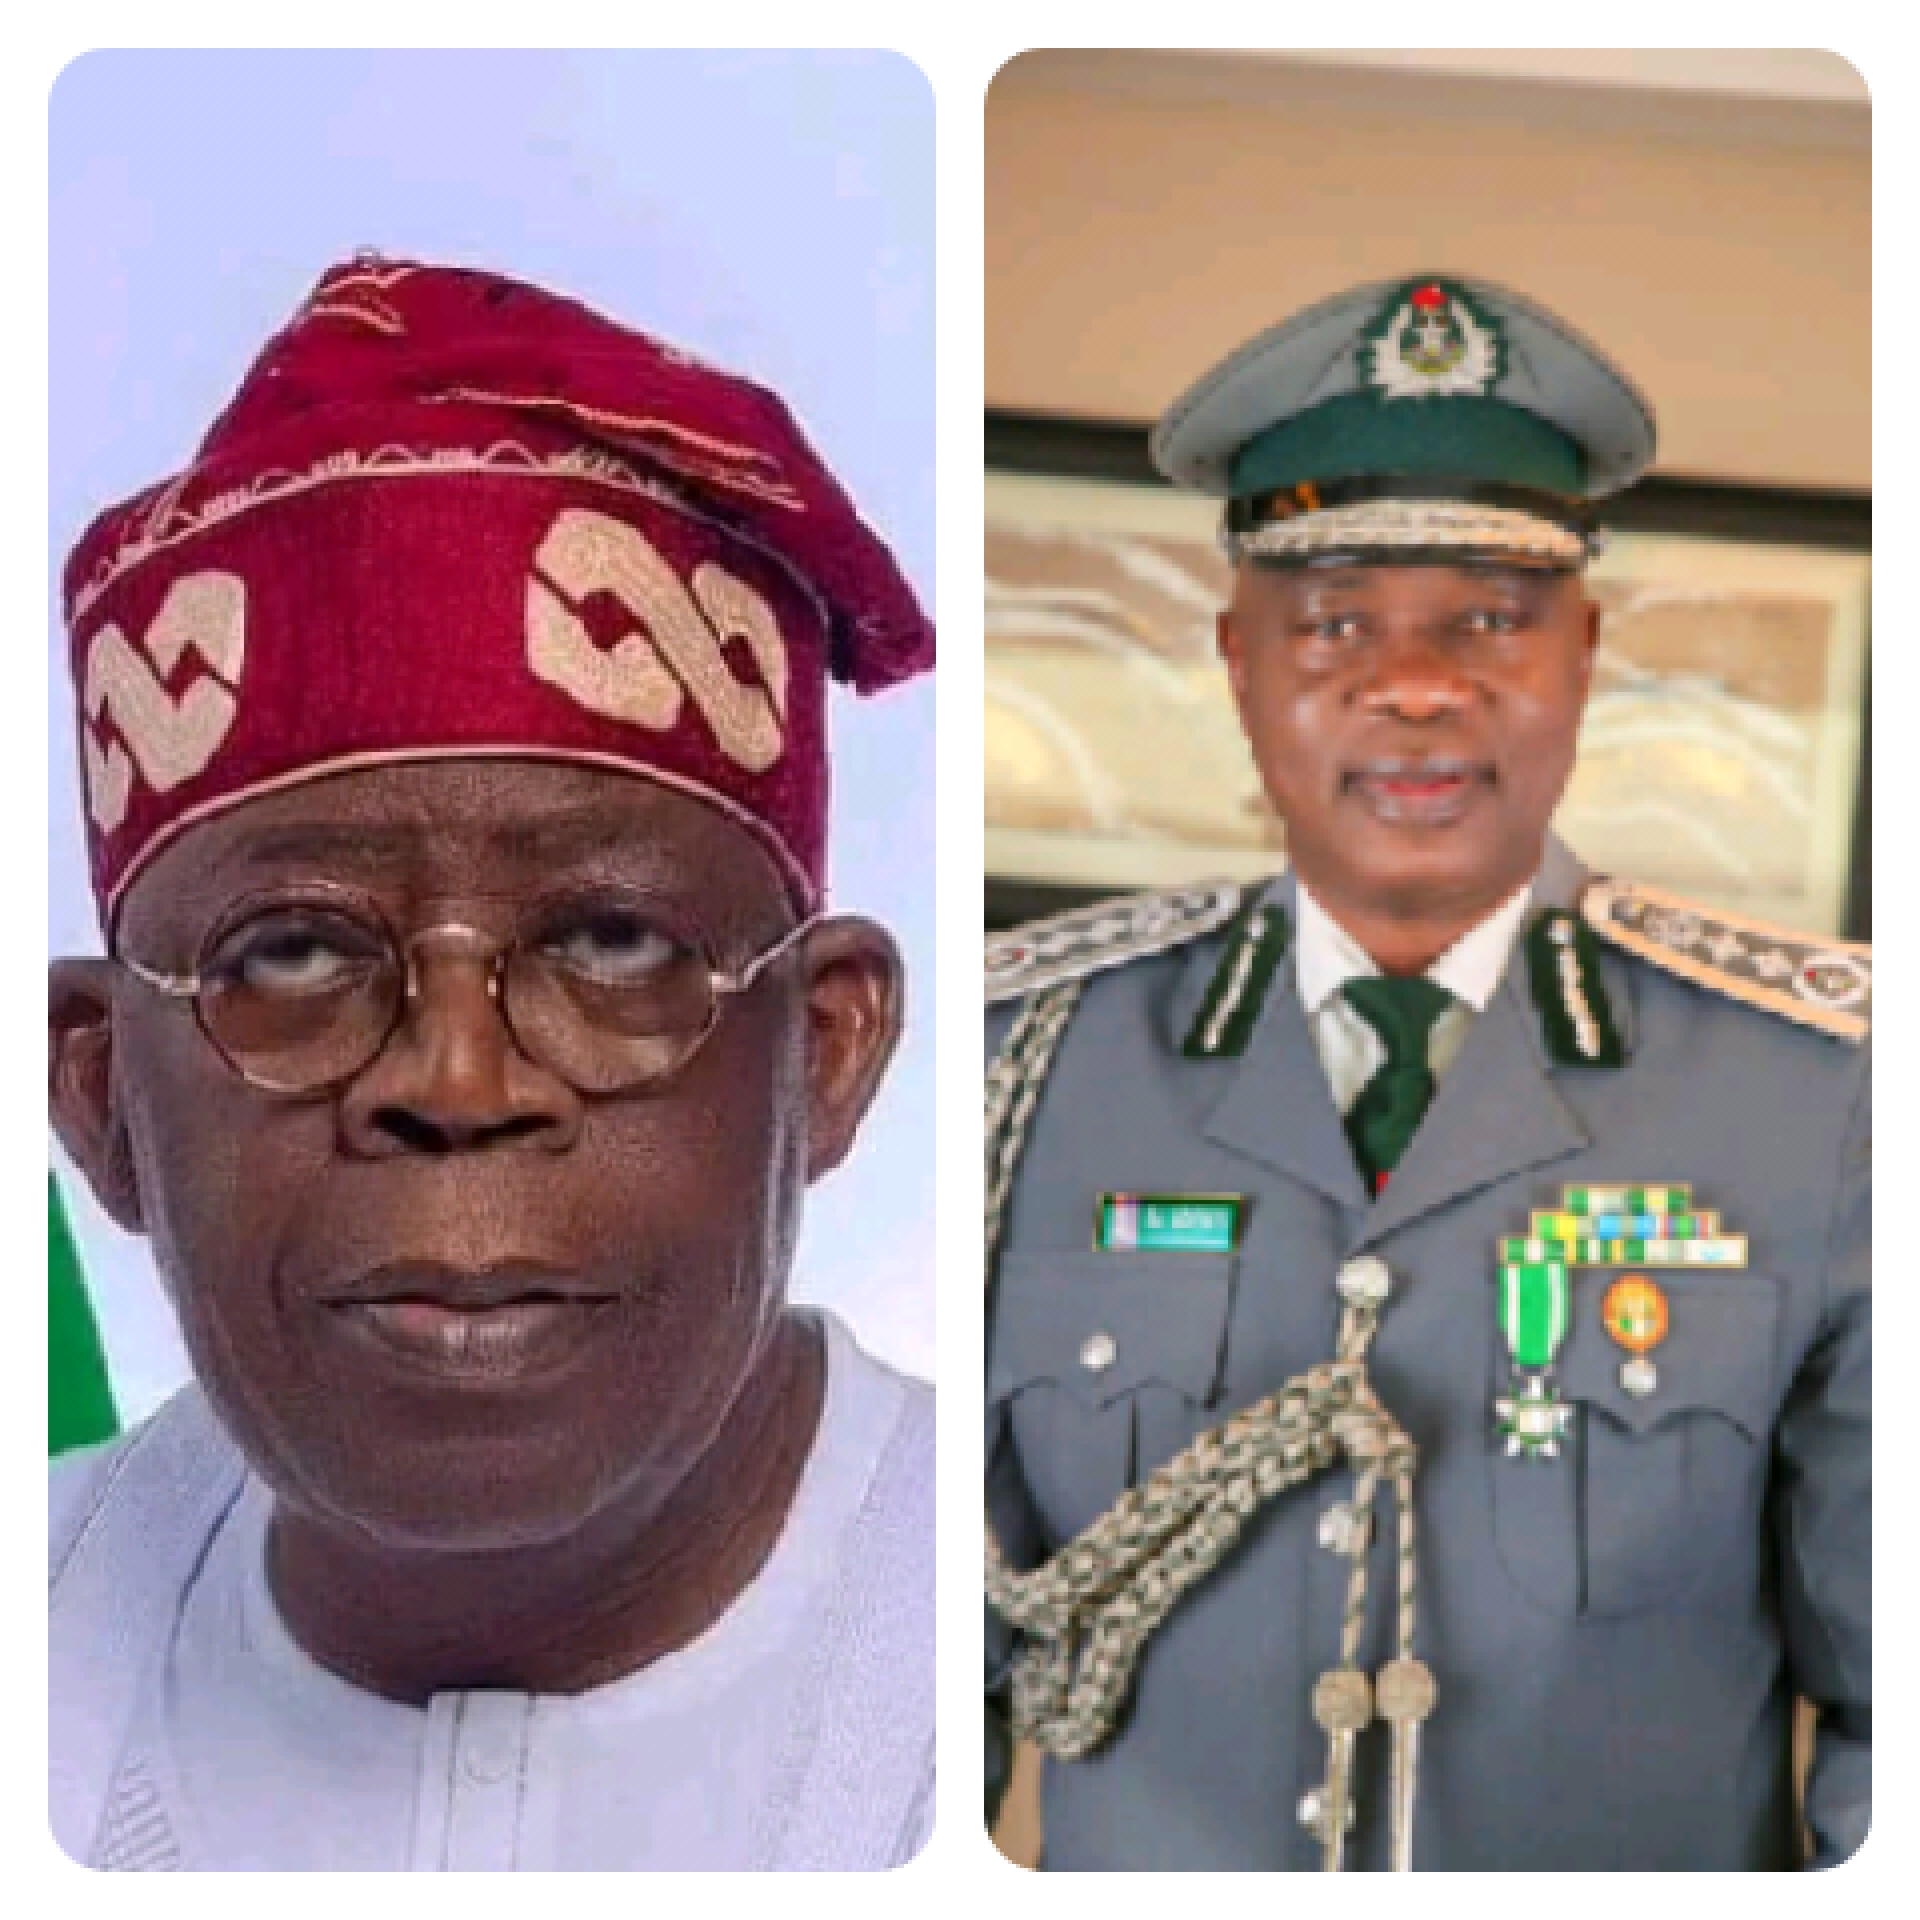 PRESIDENT TINUBU APPOINTS ADEWALE ADENIYI AS COMPTROLLER-GENERAL OF THE NIGERIA CUSTOMS SERVICE